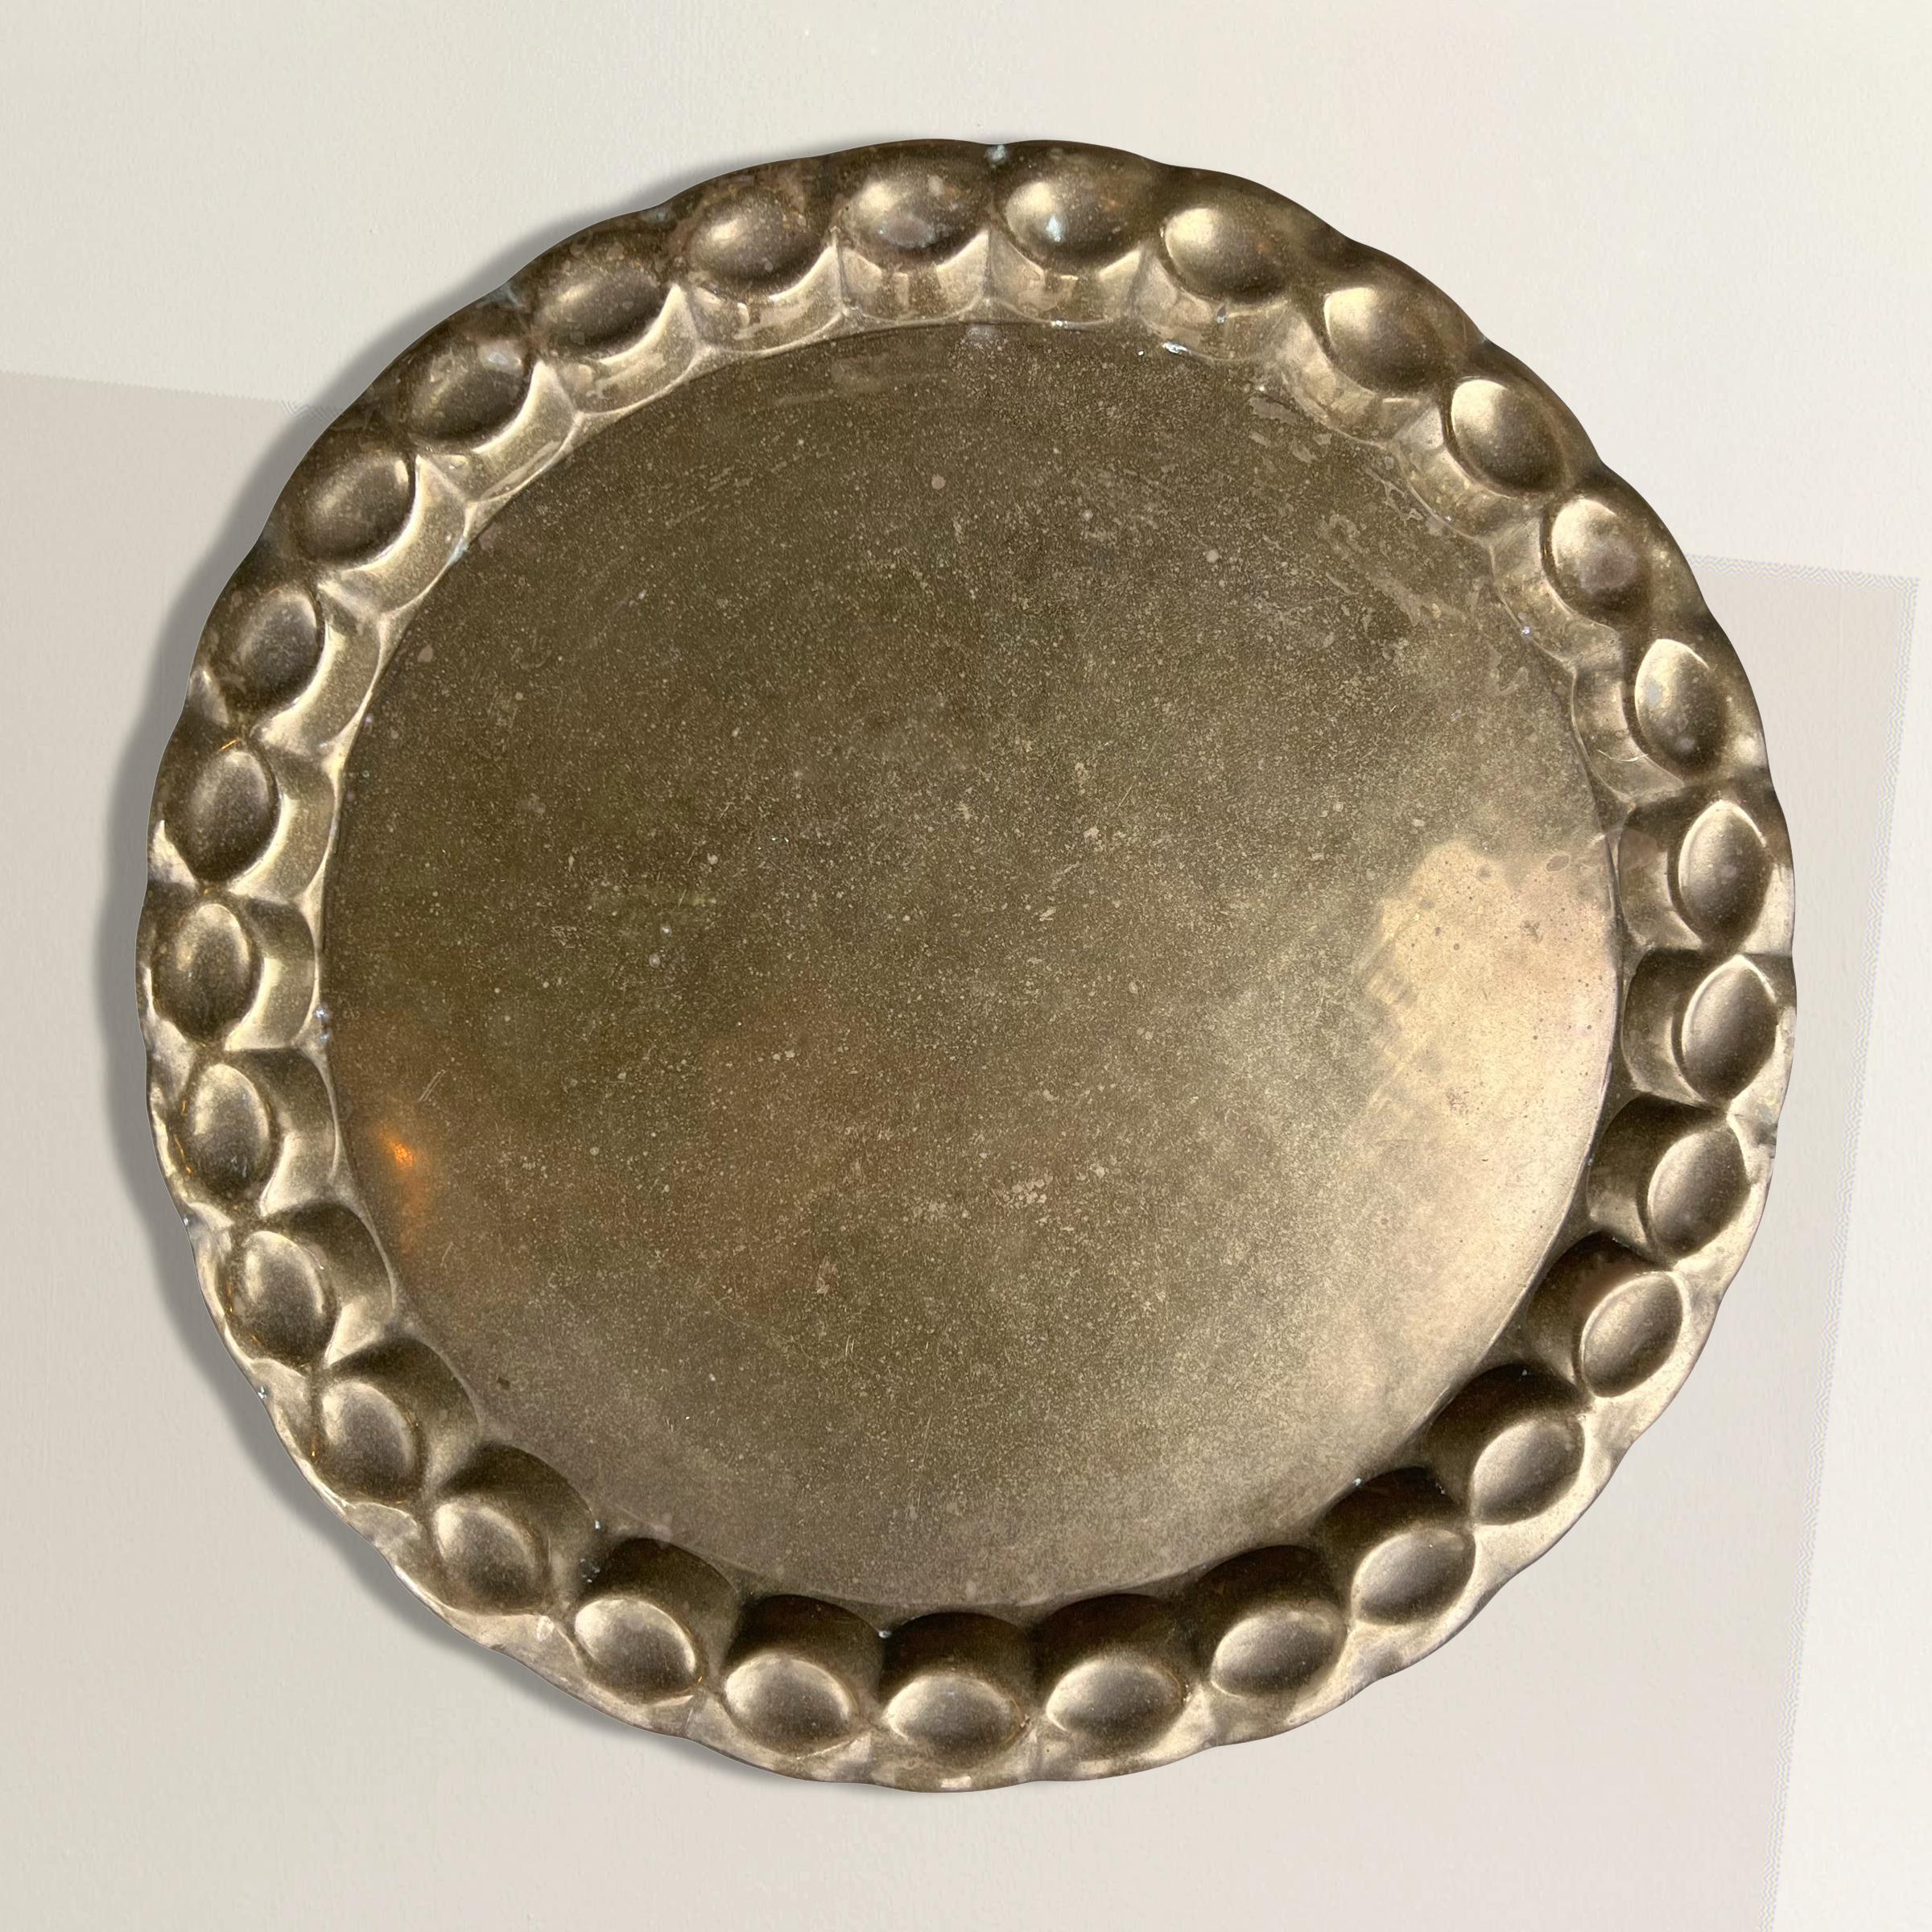 A wonderful mid-20th century Swedish hand hammered brass tray with a large dimpled rim. Perfect for serving myriad foods or drinks at your next cocktail party, but also easily at home on your coffee table and used to store books, remotes, or candles.